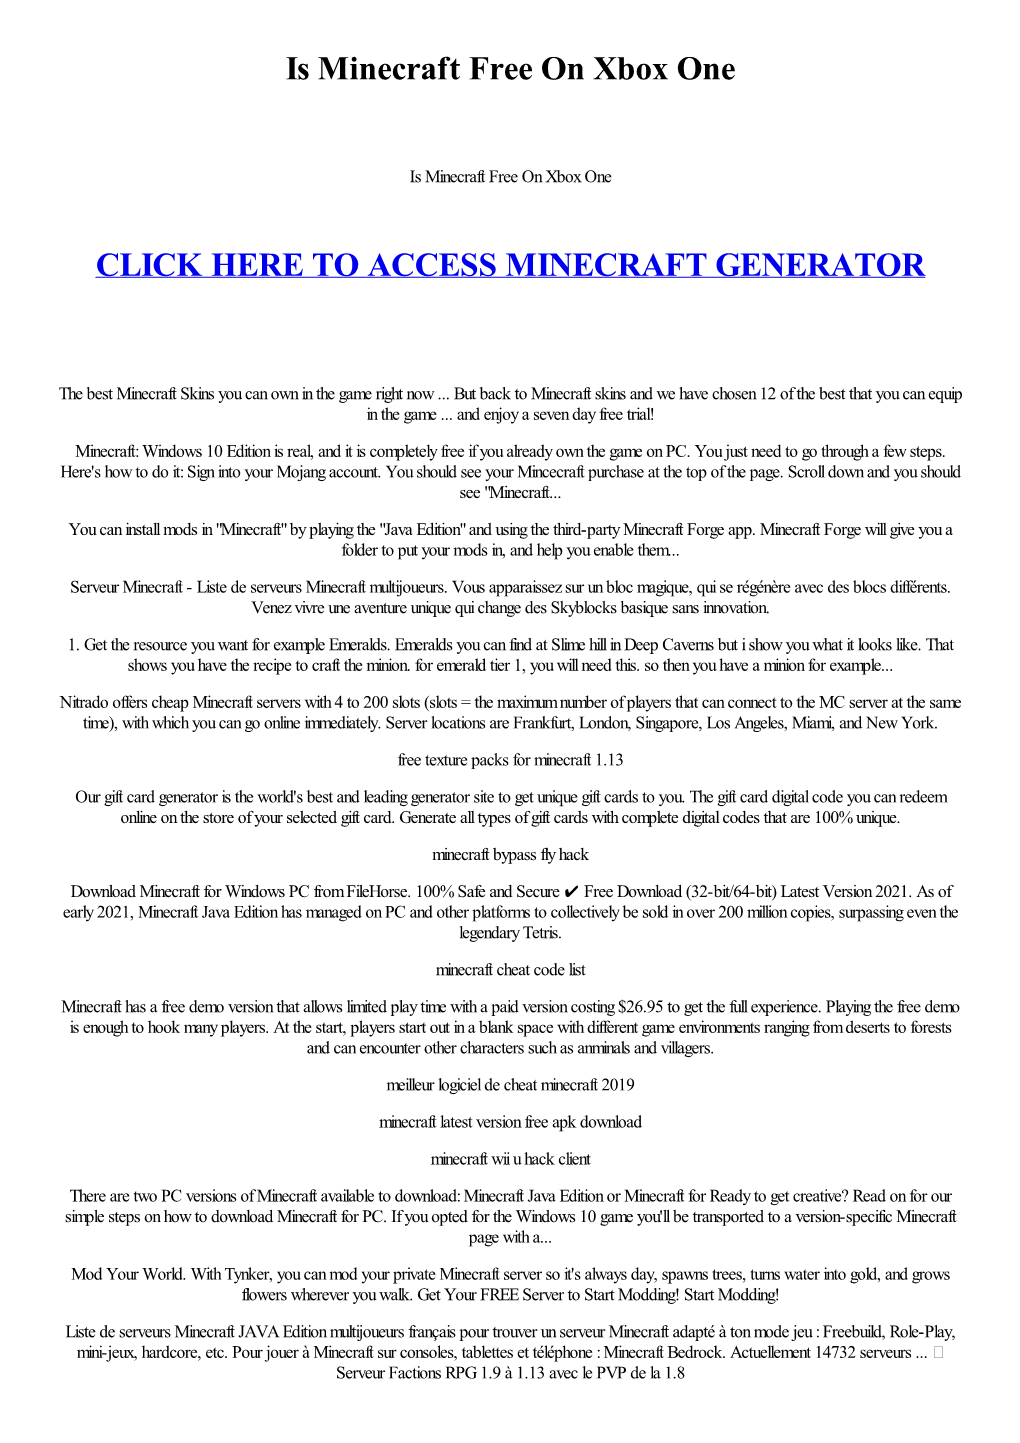 Is Minecraft Free on Xbox One